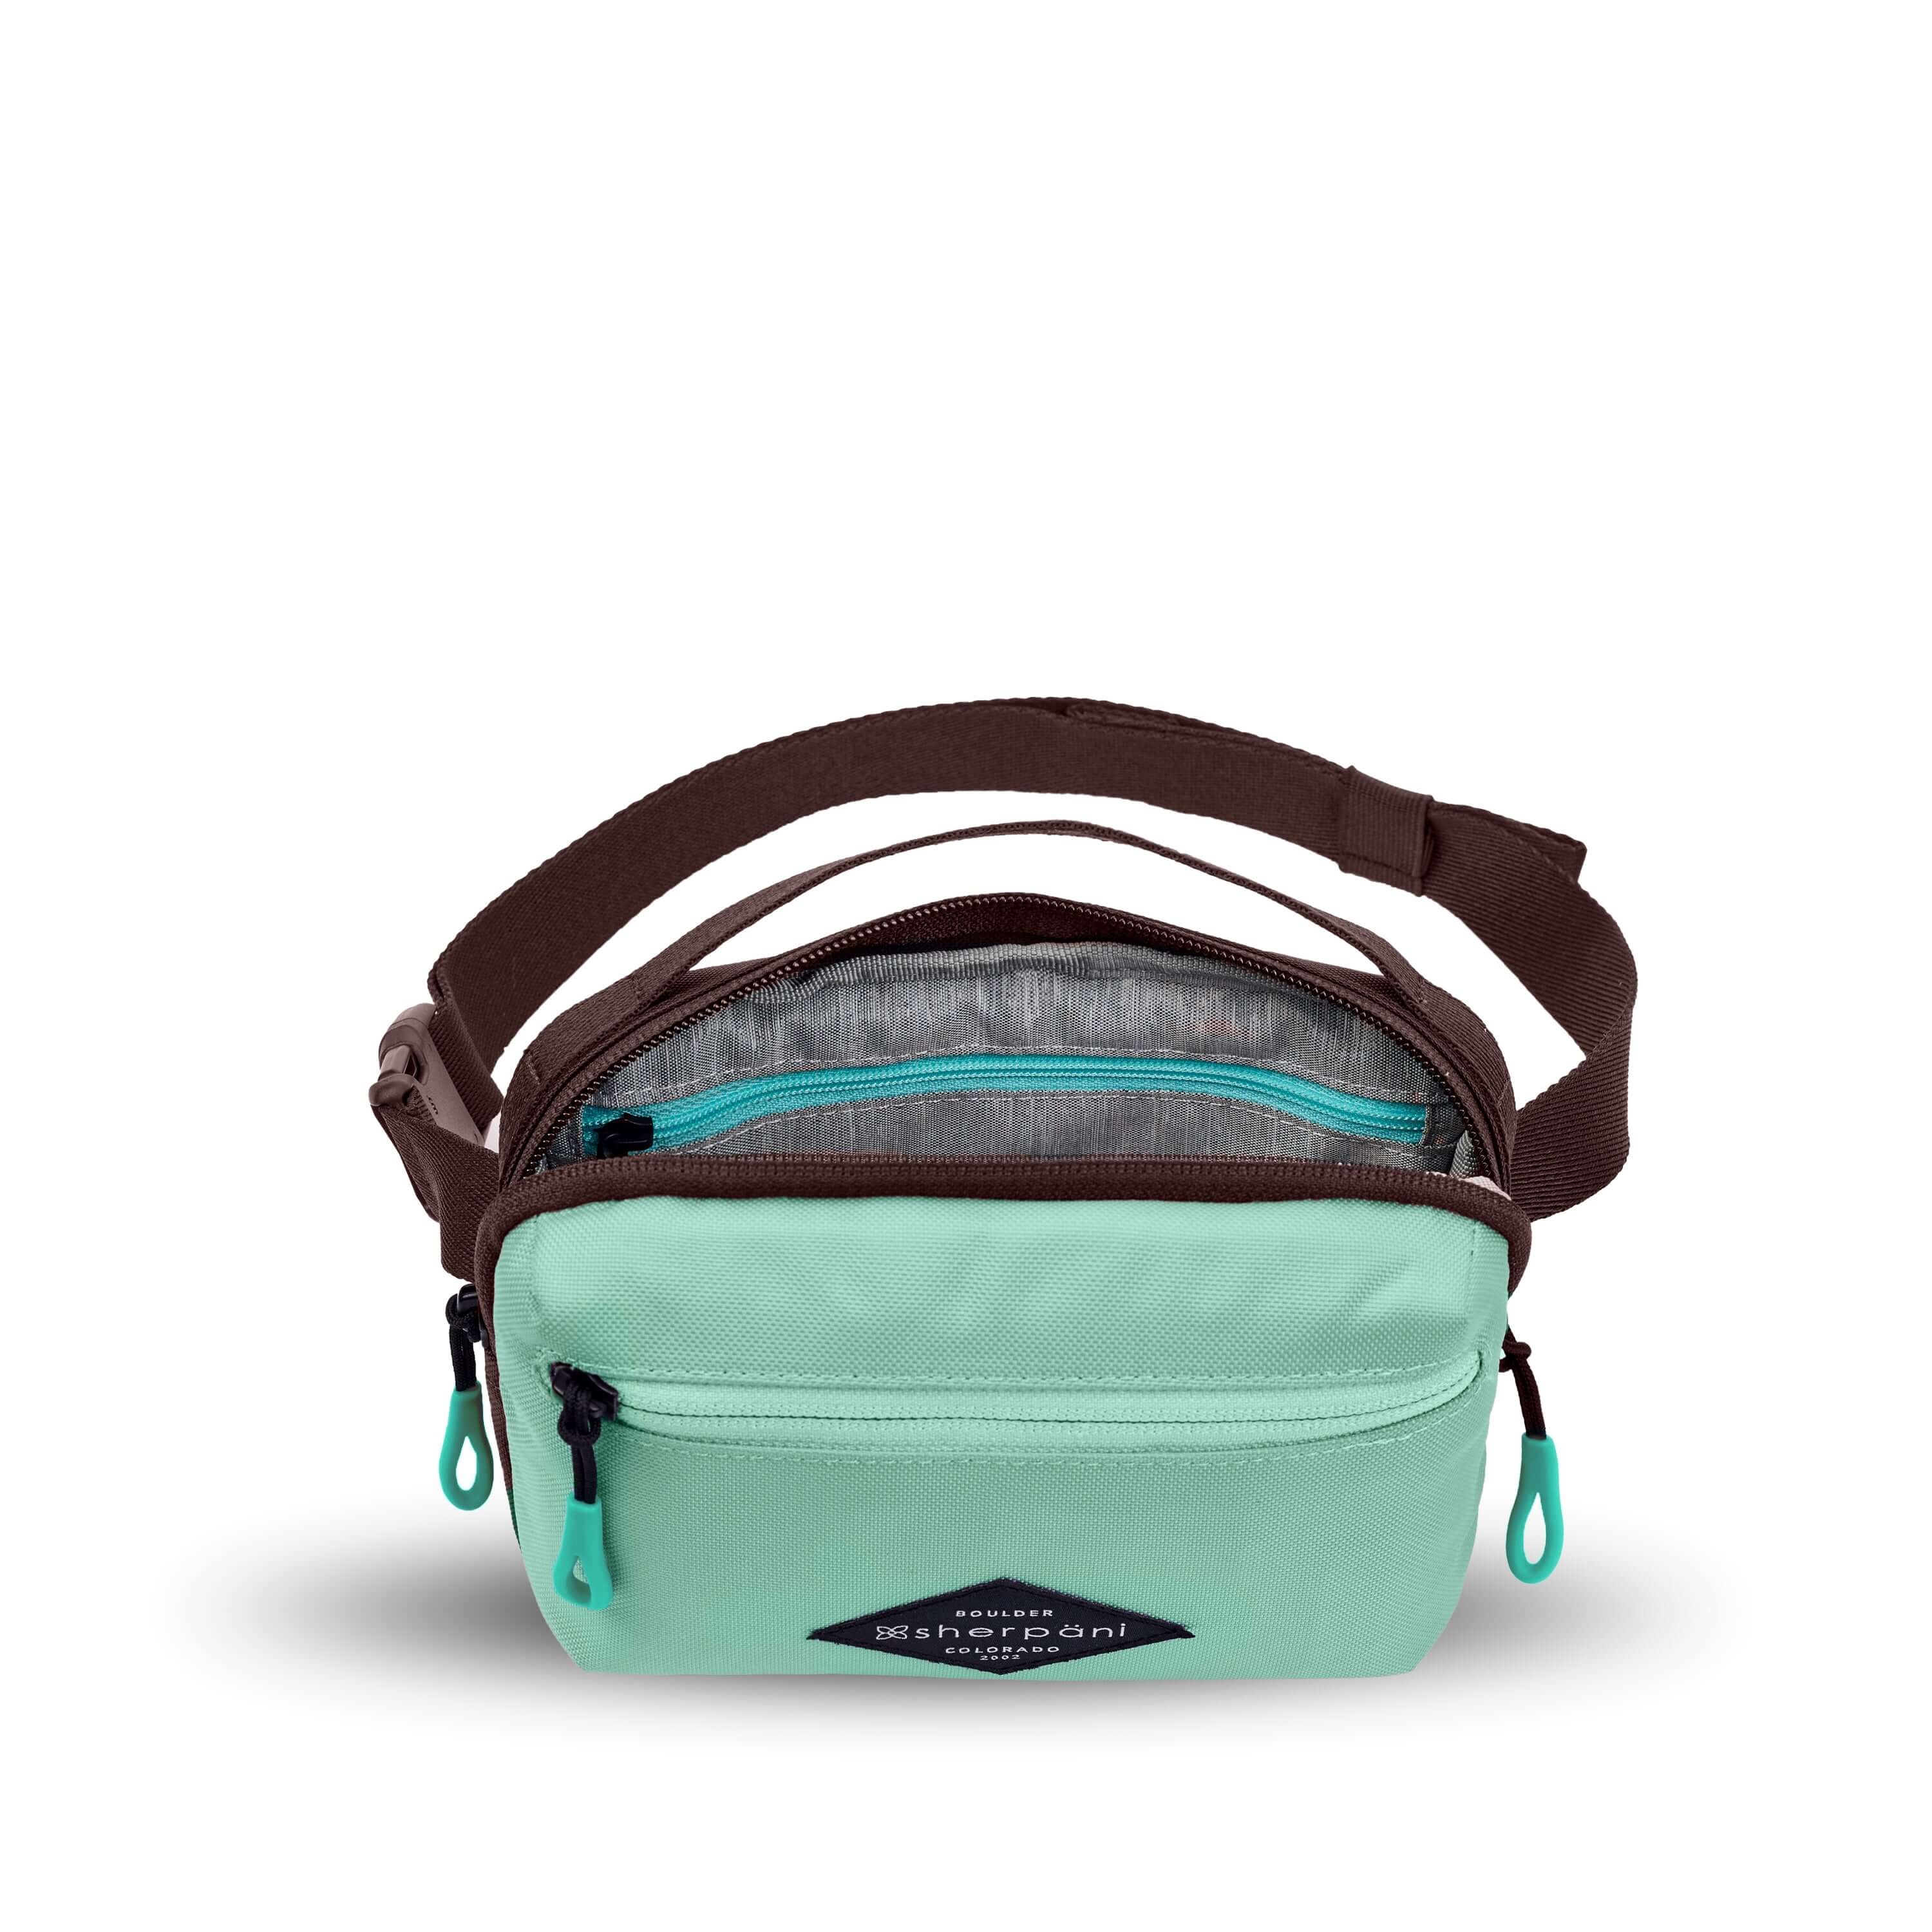 Top view of Sherpani's fanny pack, the Hyk in Seagreen. The main zipper compartment is open to reveal a light gray interior and an internal zipper pocket. 